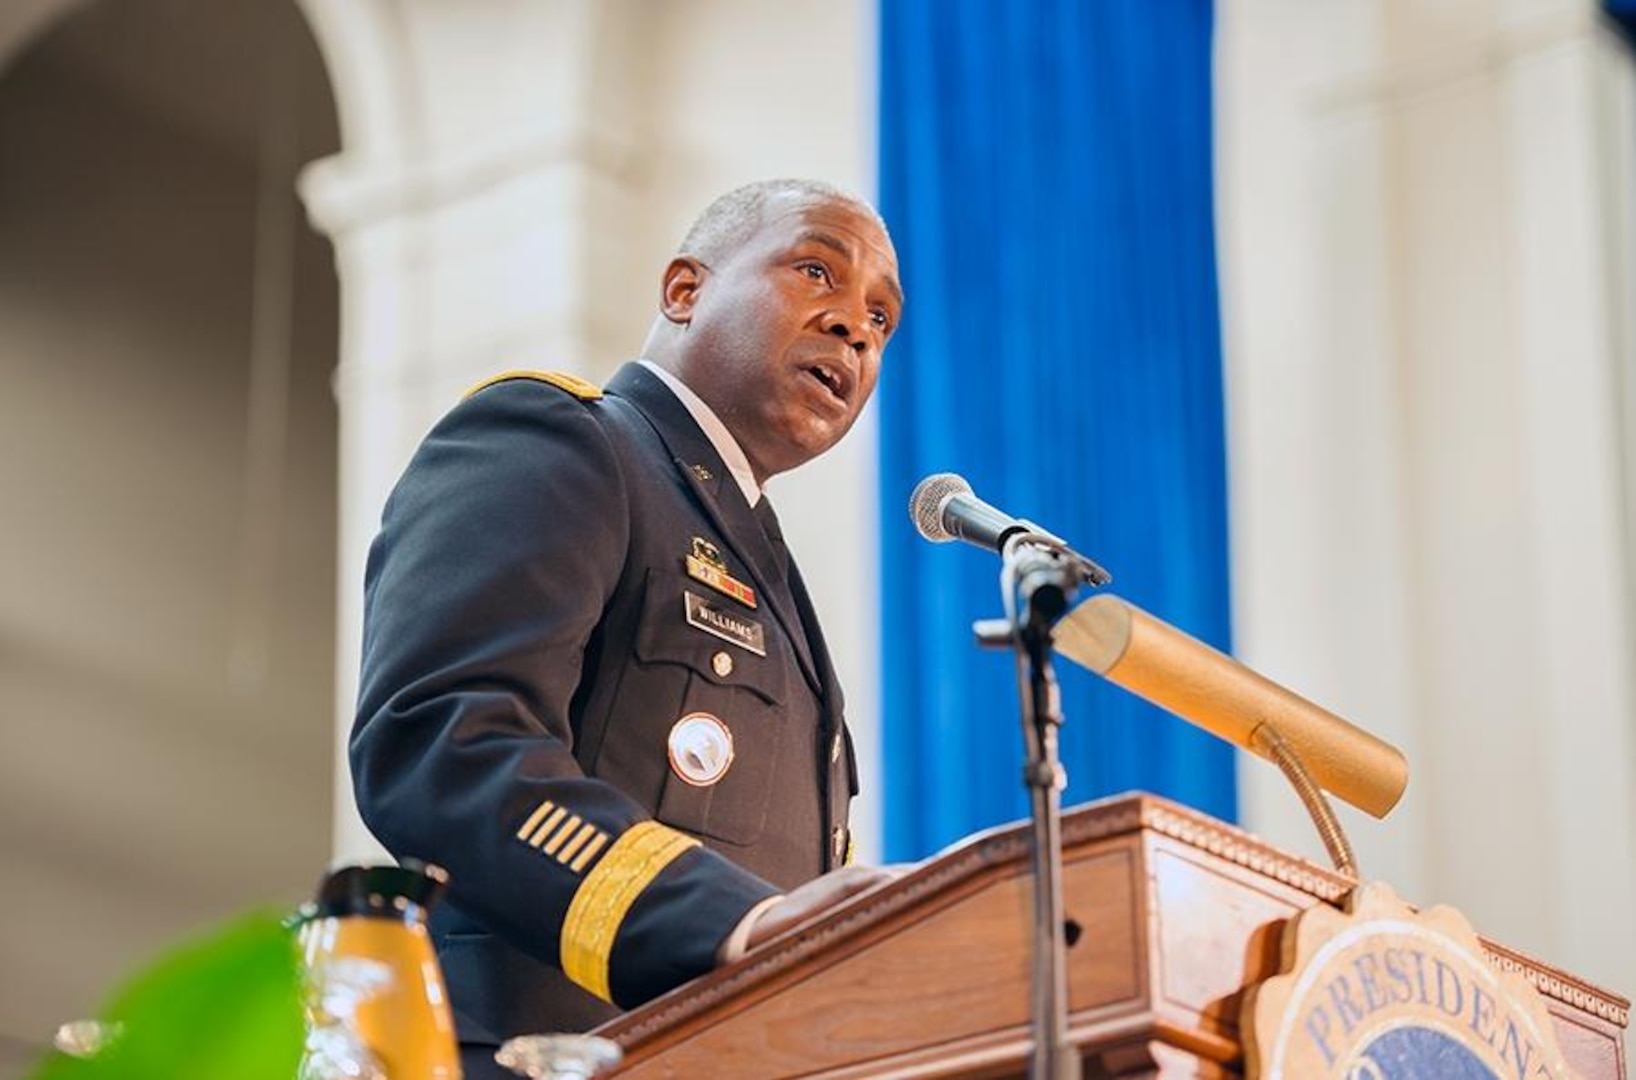 Defense Logistics Agency Director Army Lt. Gen. Darrell K. Williams delivers the keynote address at the Hampton University Founder’s Day Ceremony Jan. 28.